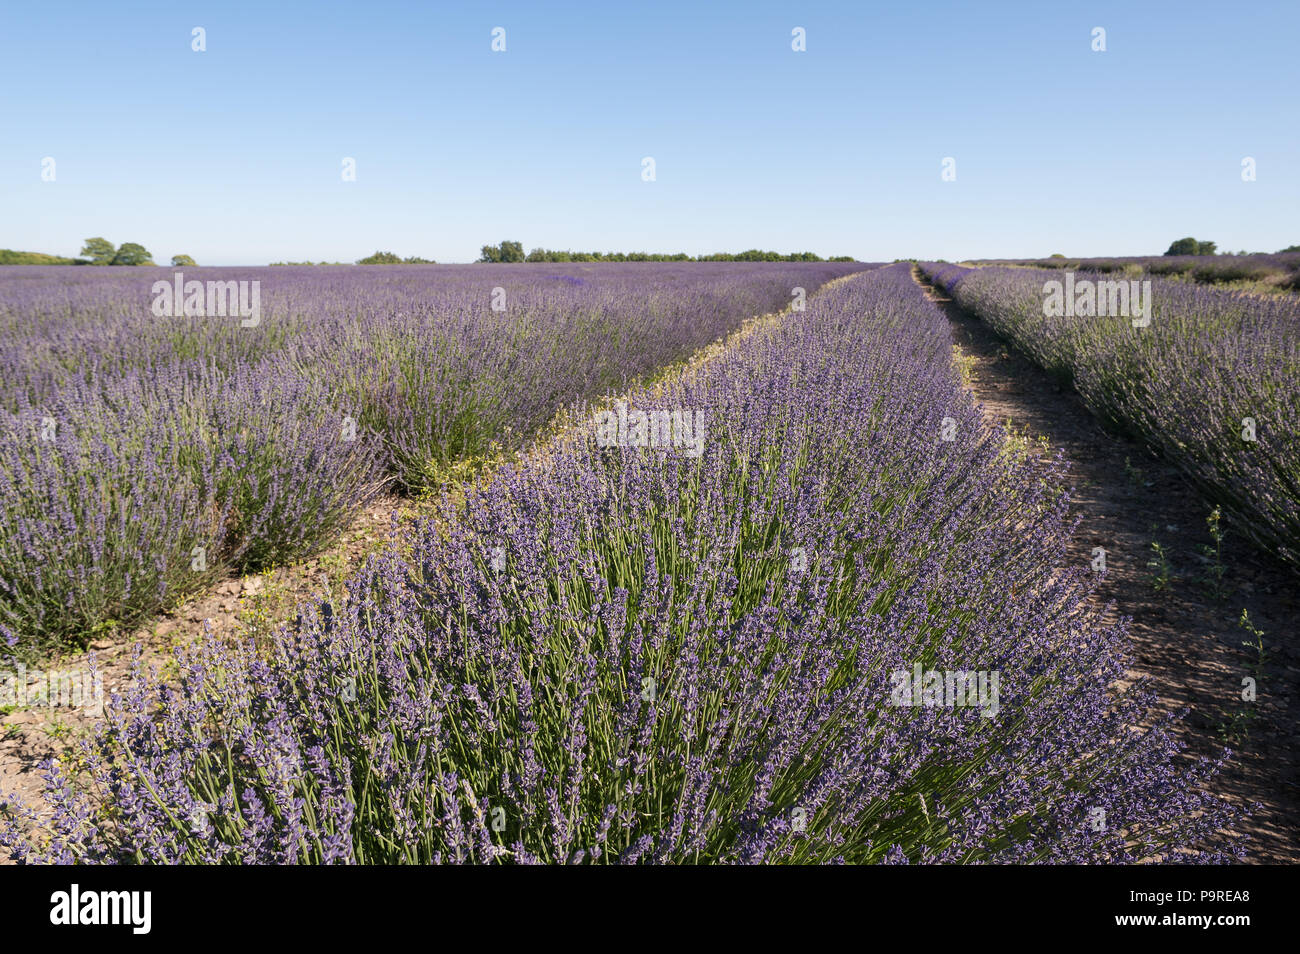 Lavender field in human spectrum range to compare with infrared view at 720nm, comparison to unseen Stock Photo